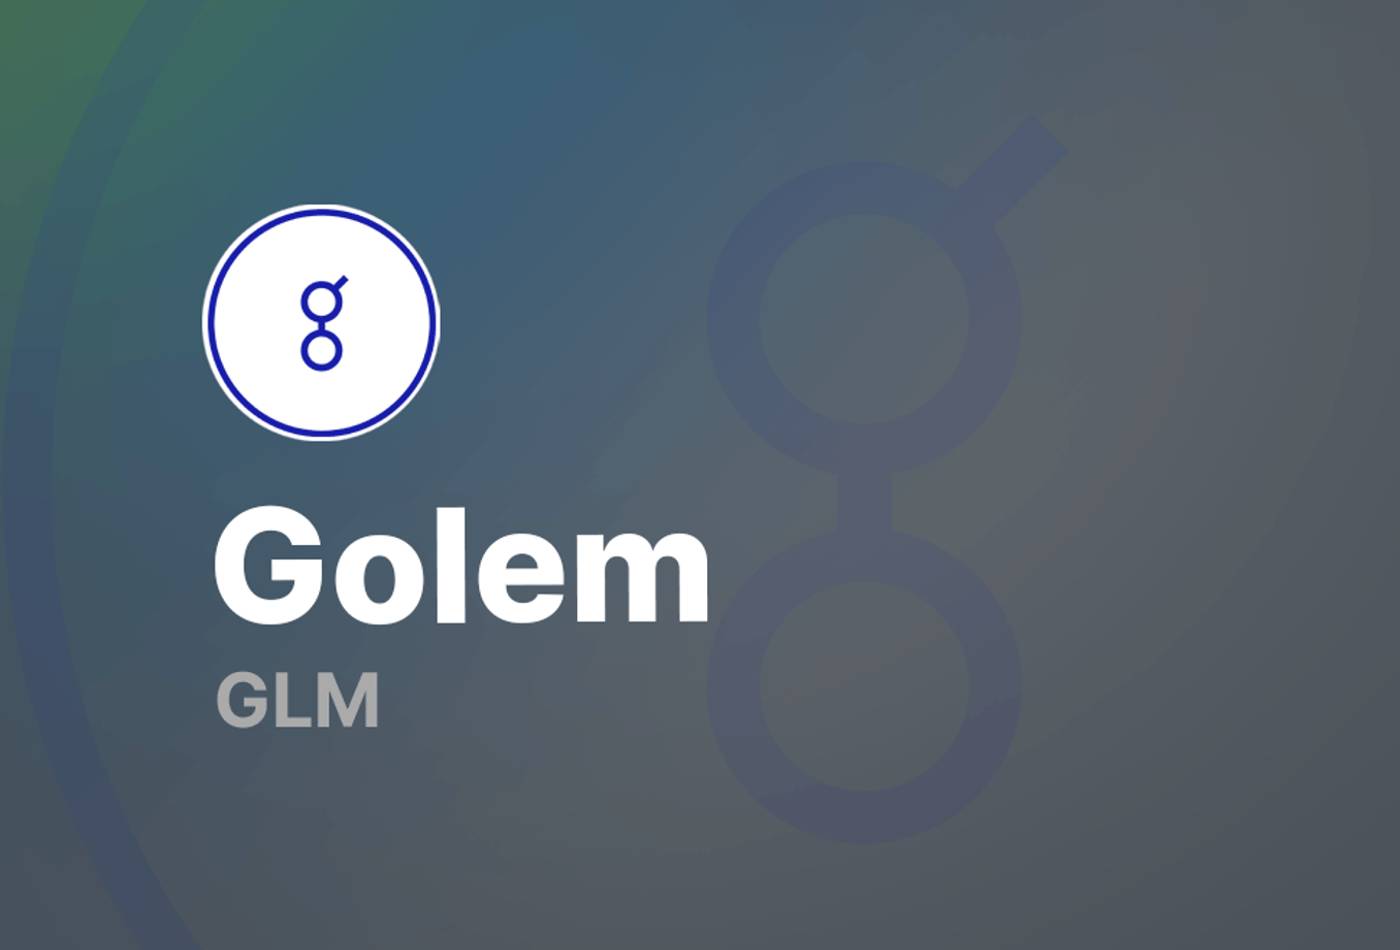 Golem (GLM) Price Prediction 2022-2030: The Most Realistic Analysis